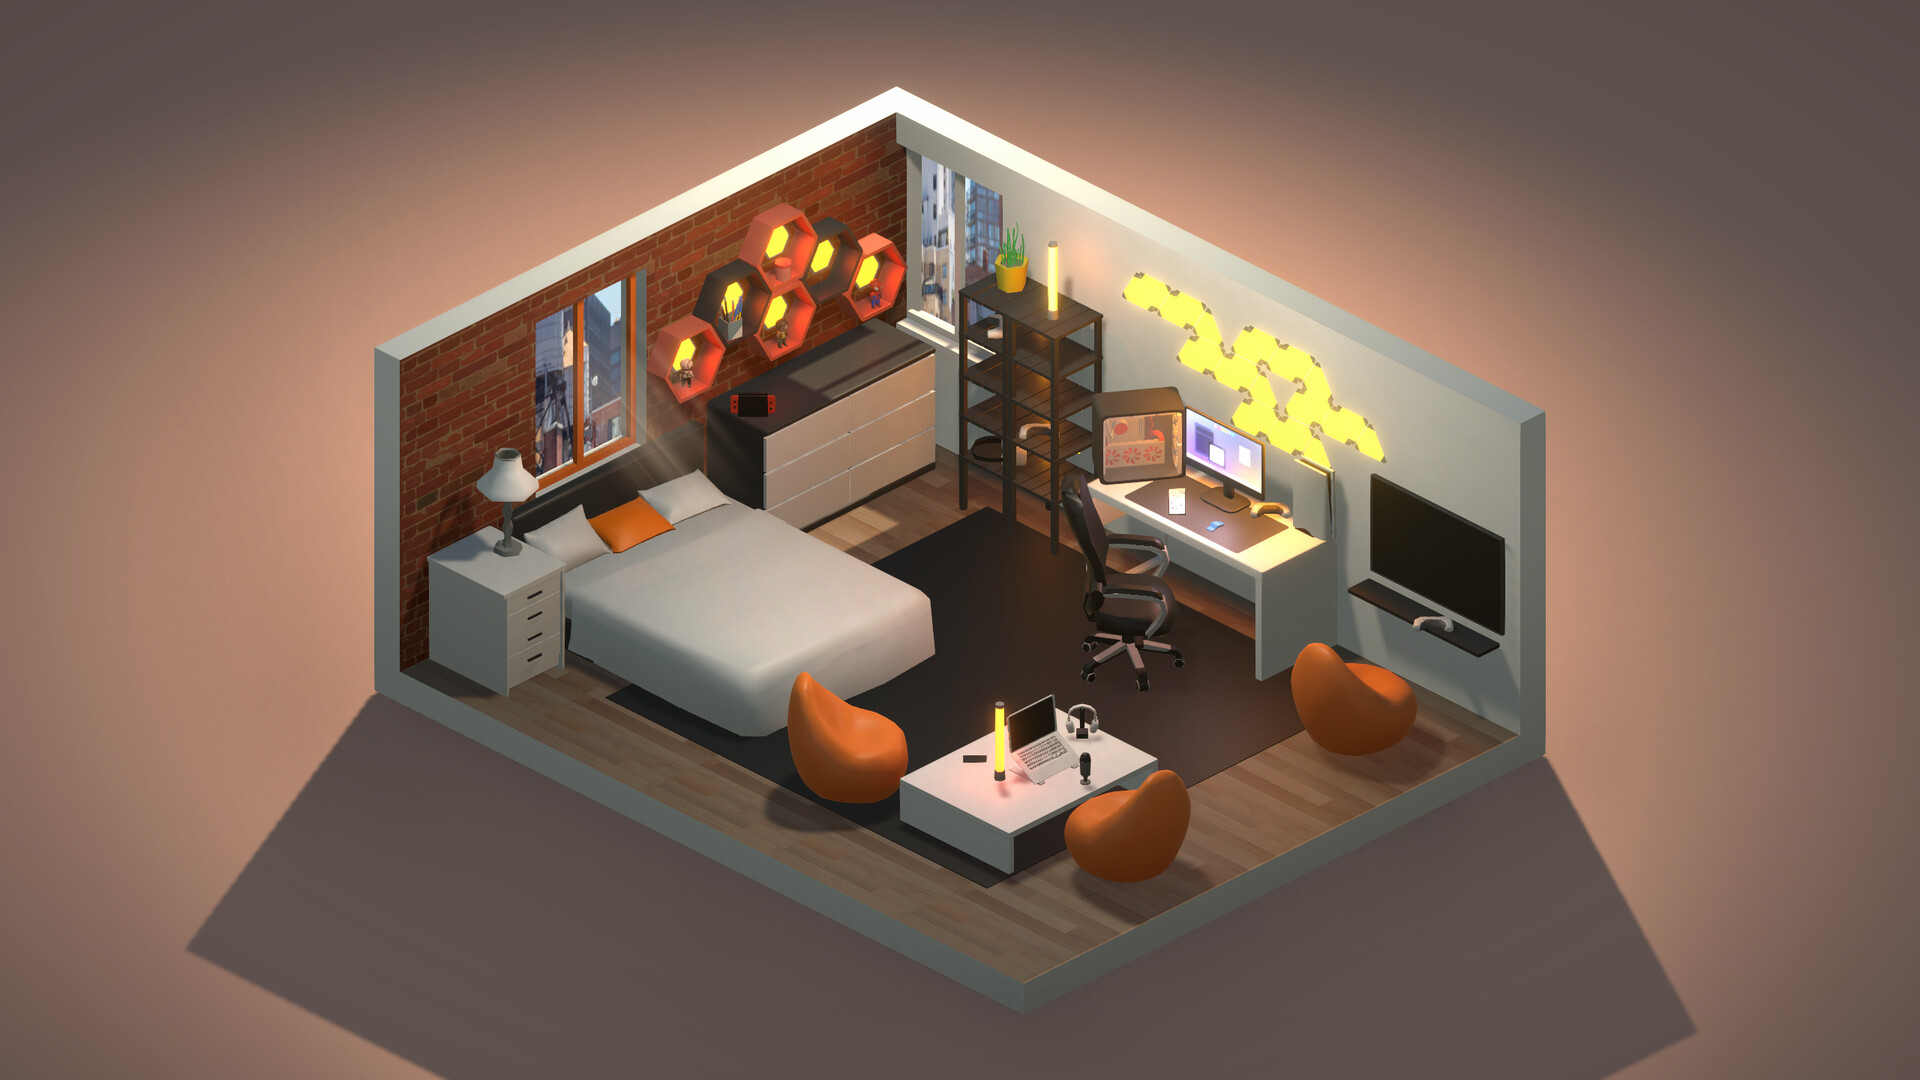 30 Cool Gaming Room Ideas For Your Dream Home